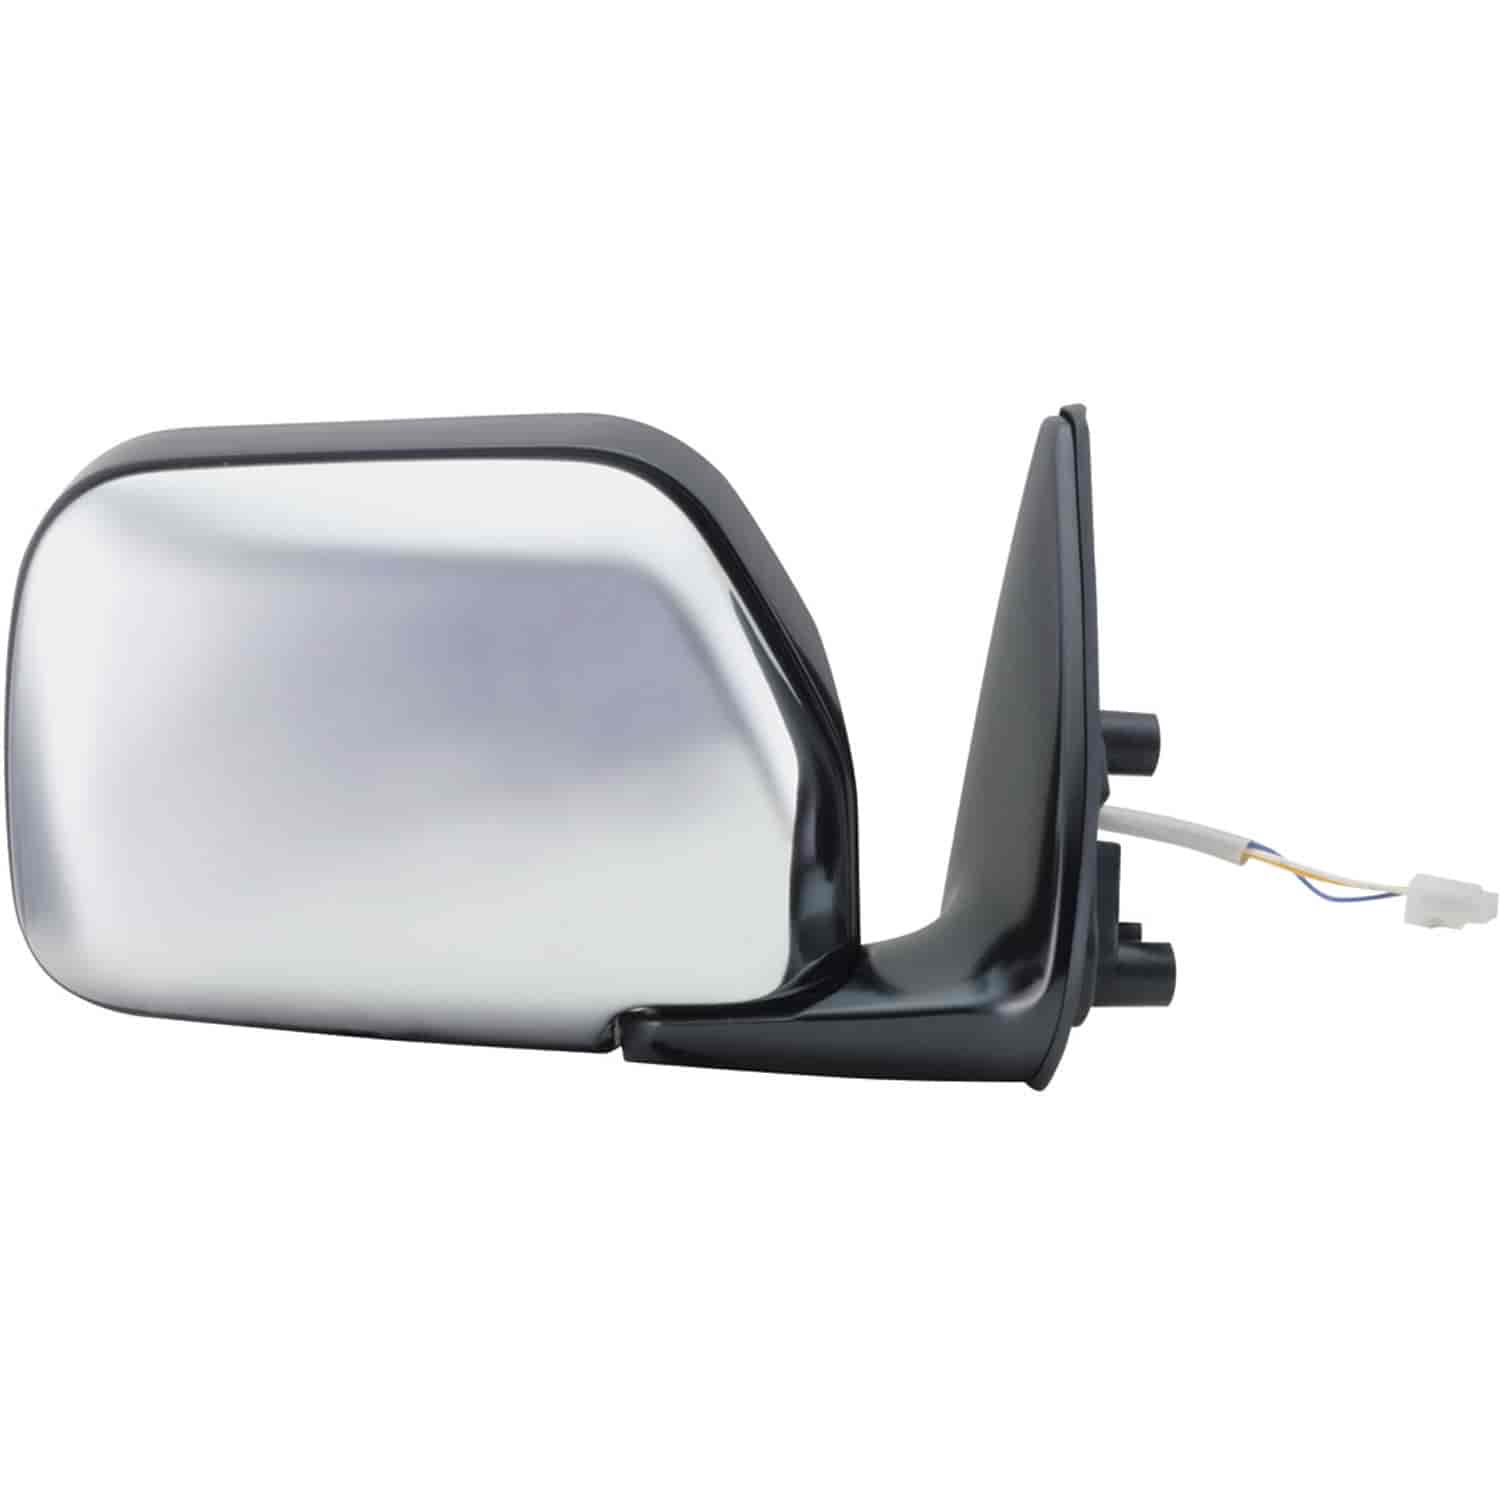 OEM Style Replacement mirror for 93-98 Toyota T-100